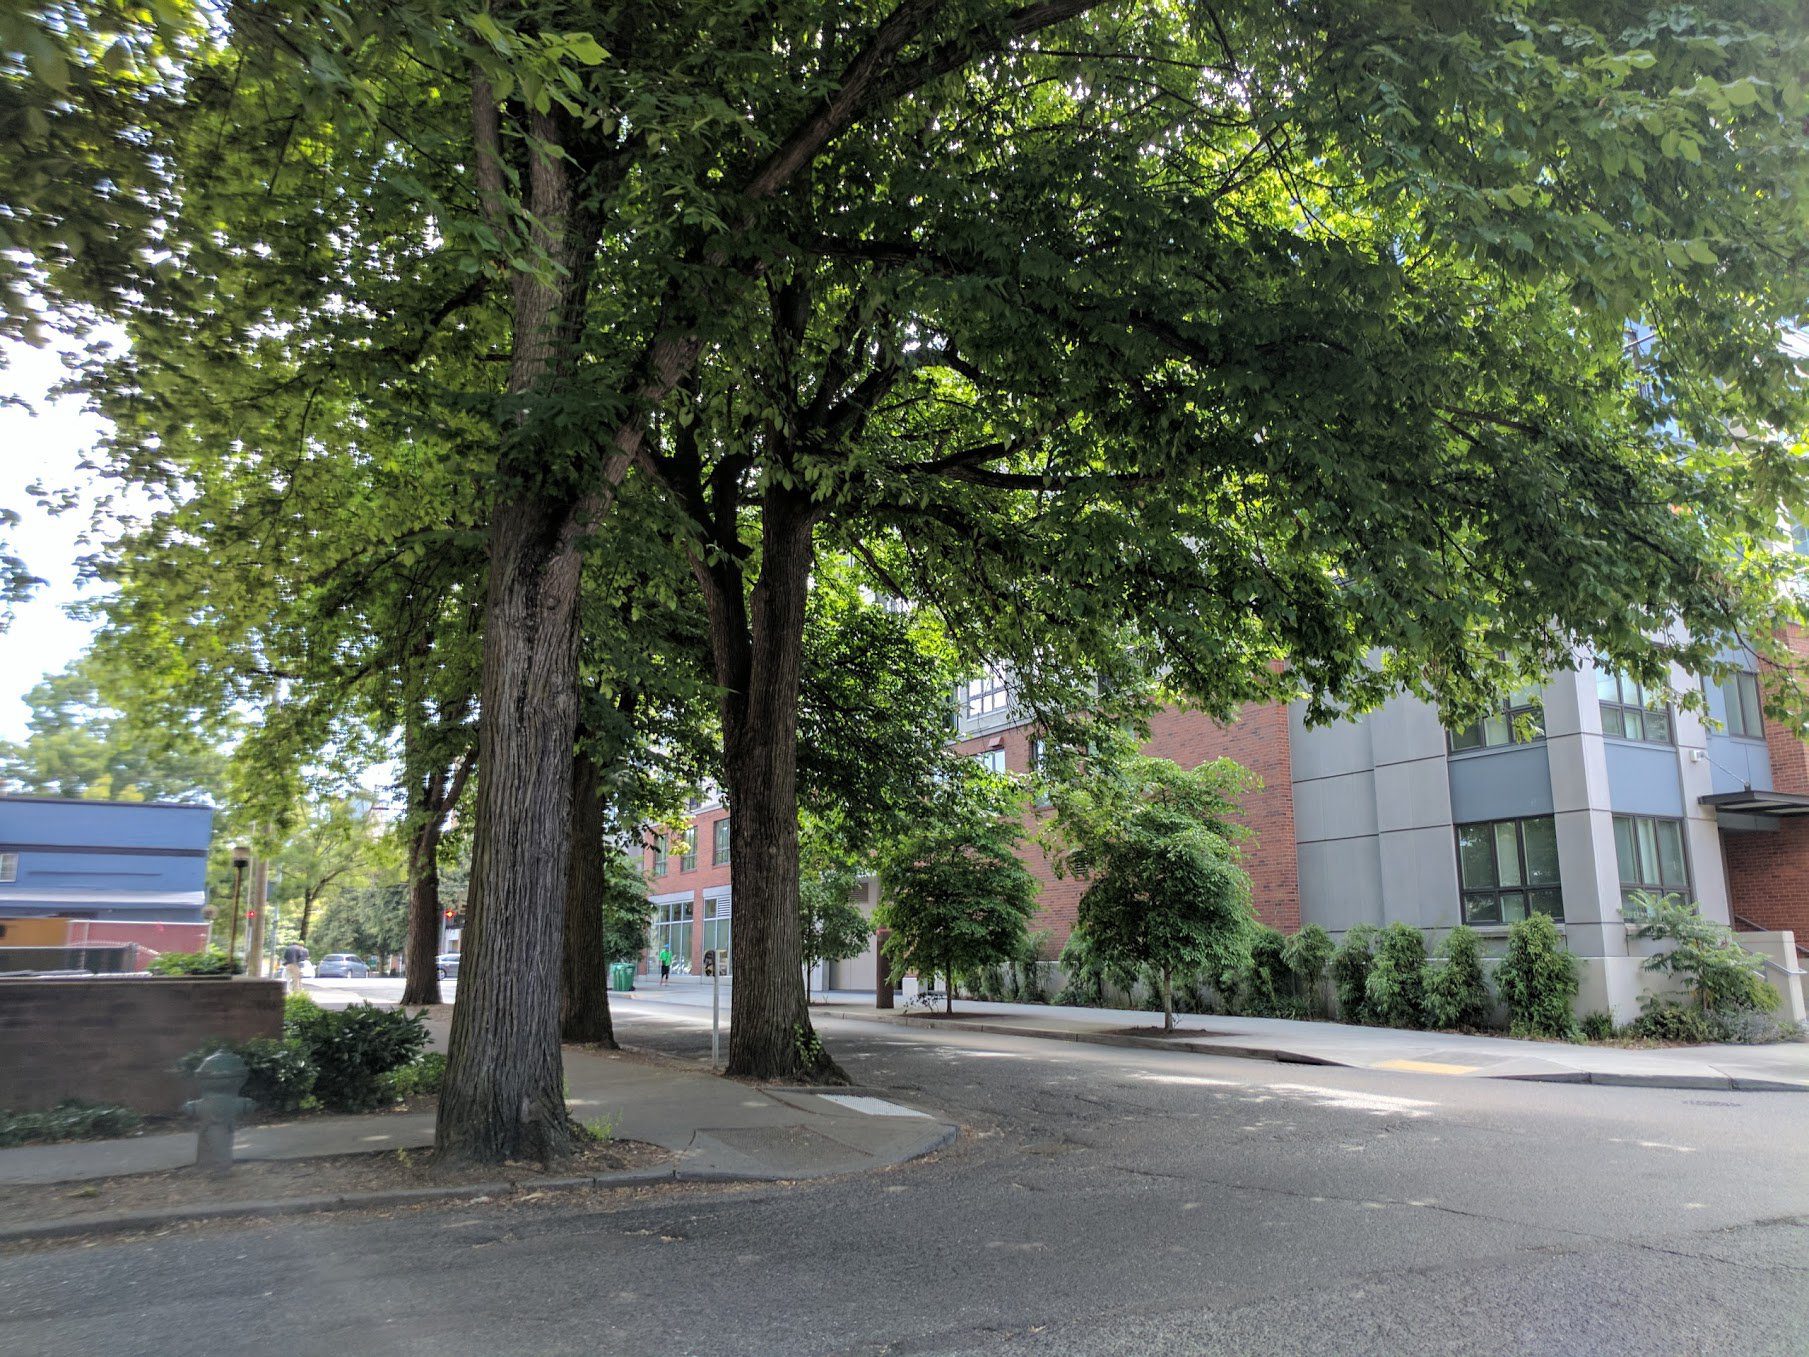 Large, mature trees stand tall near a street in the city. Green leaves cover most of the image, with large buildings in the background.